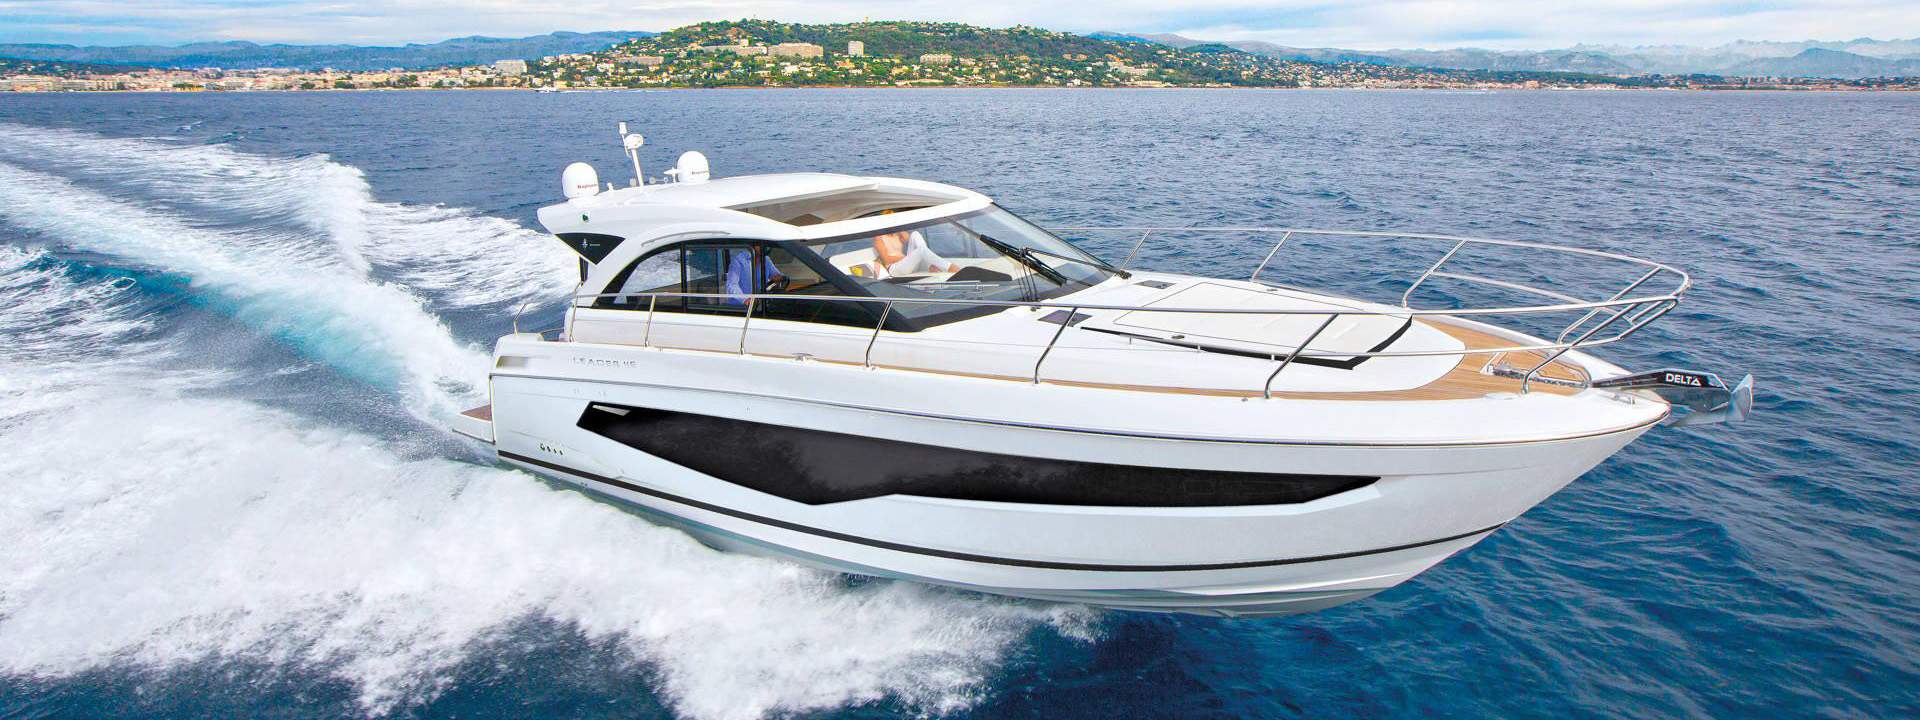 Barco a motor Leader 46